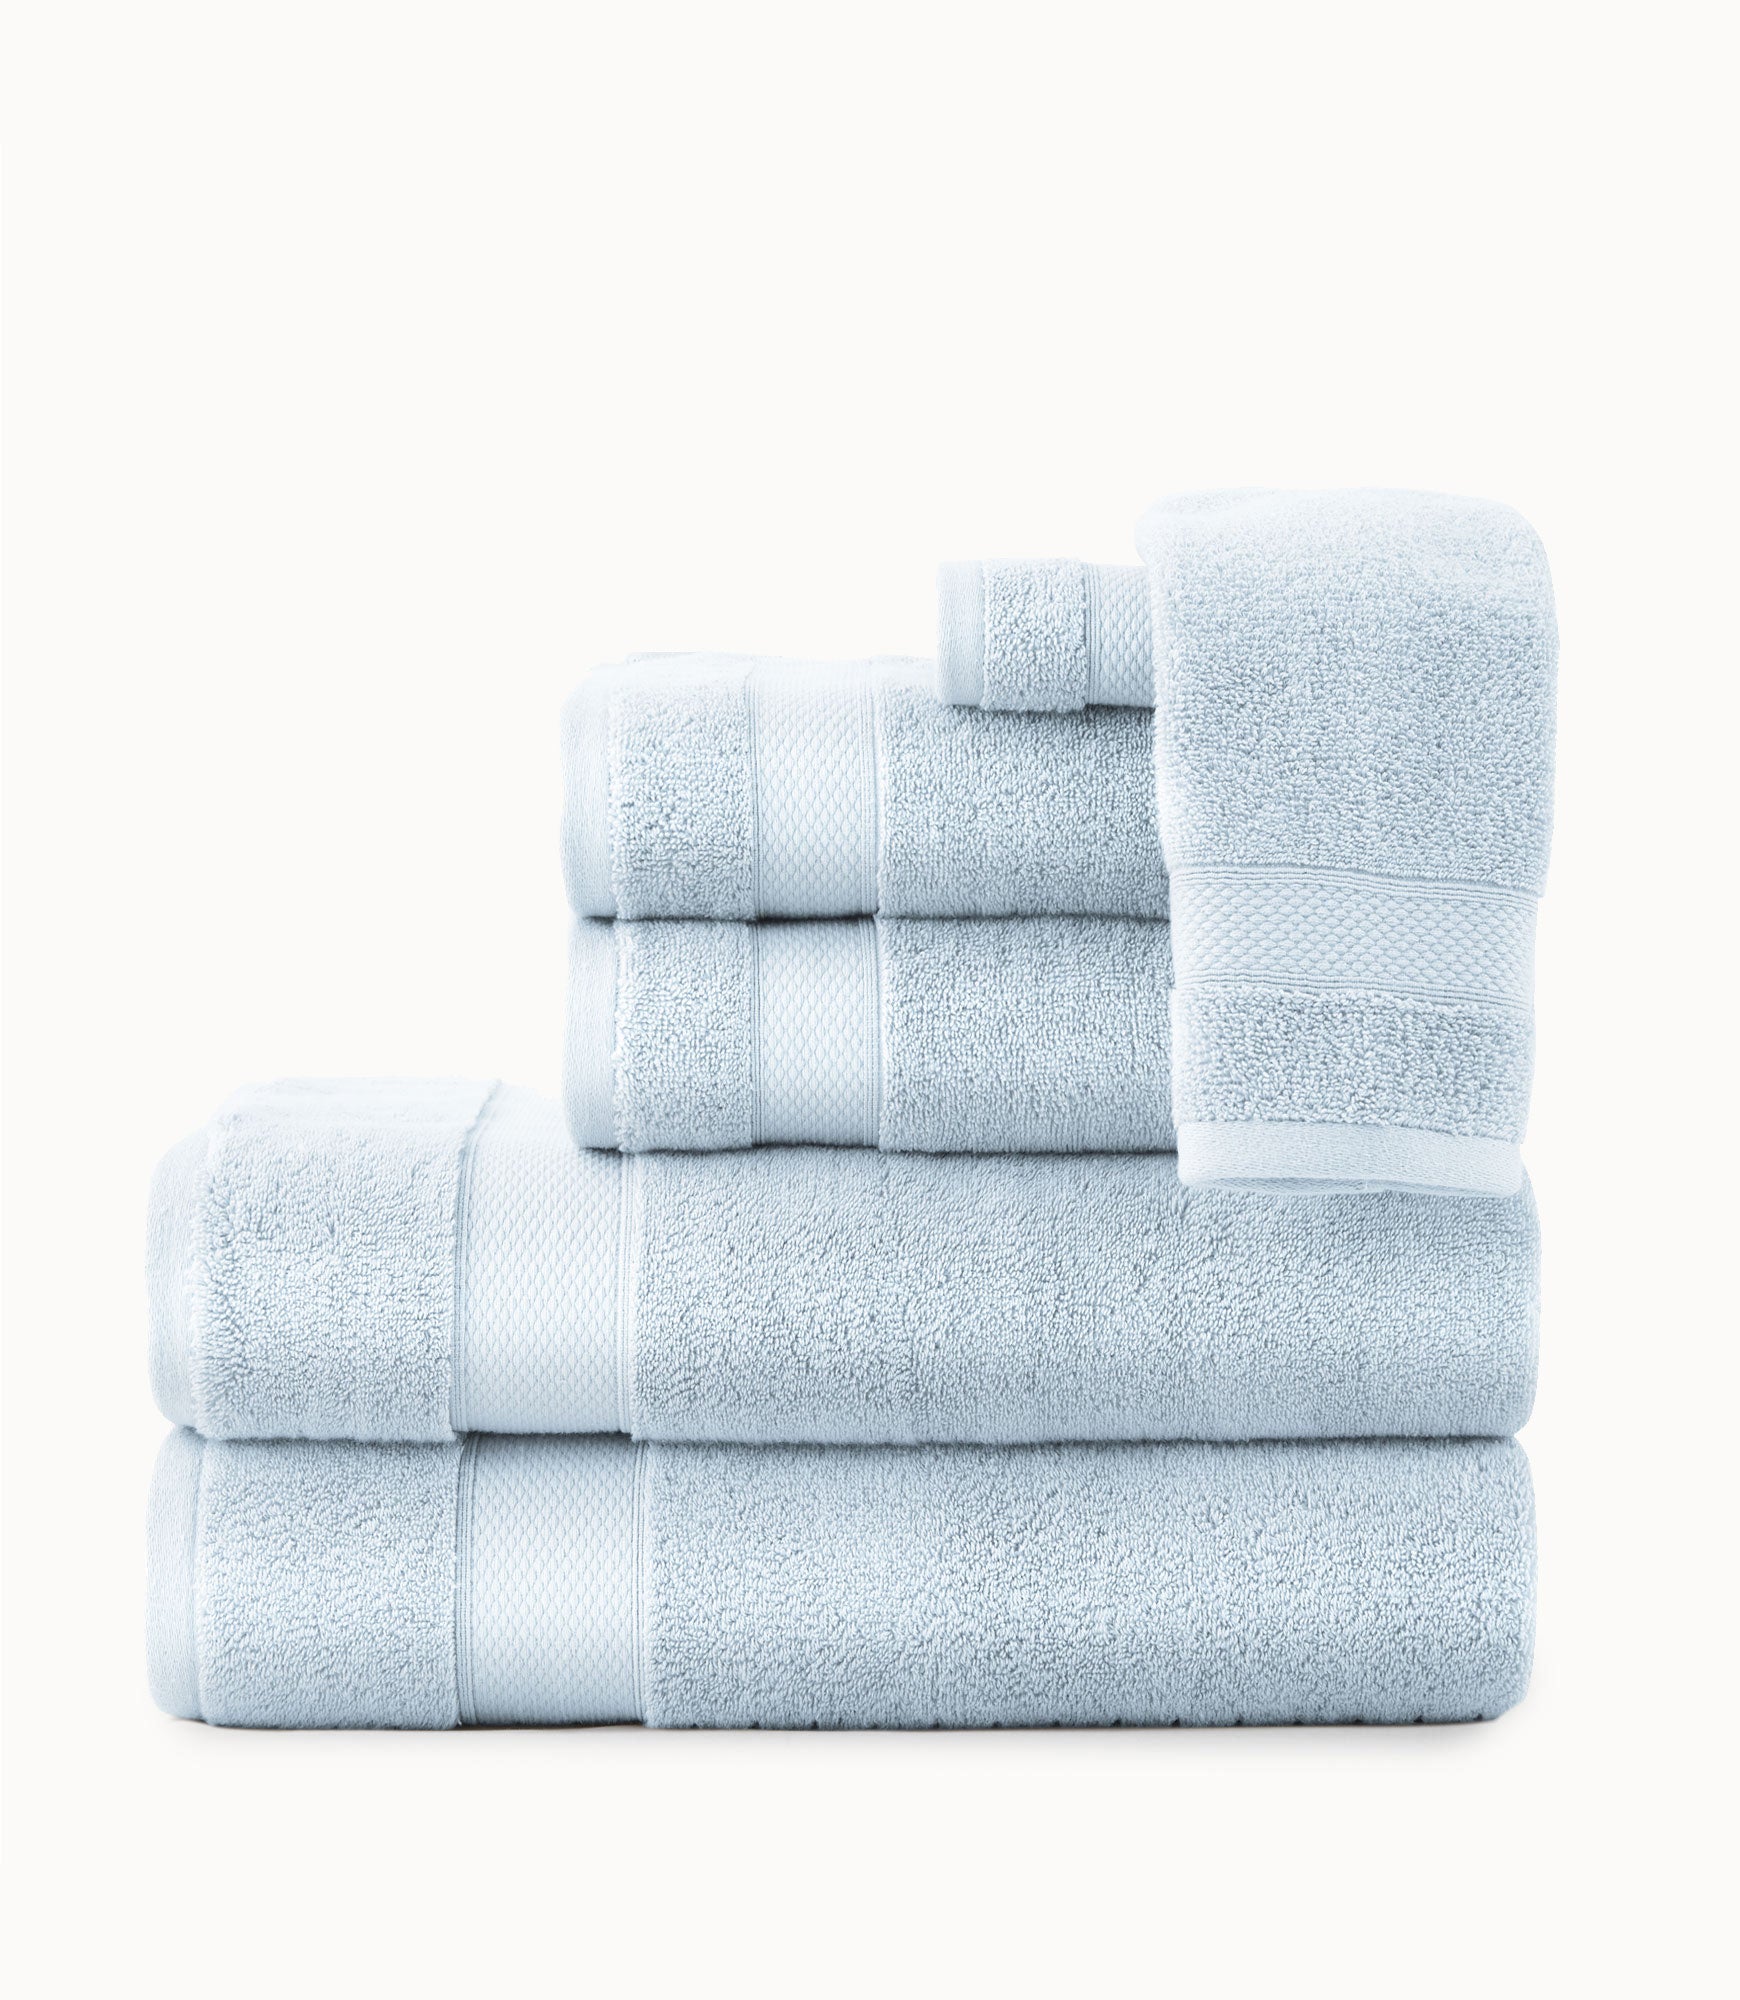 Small Bath Towels for Seniors - Textile & Hospitality Blogs